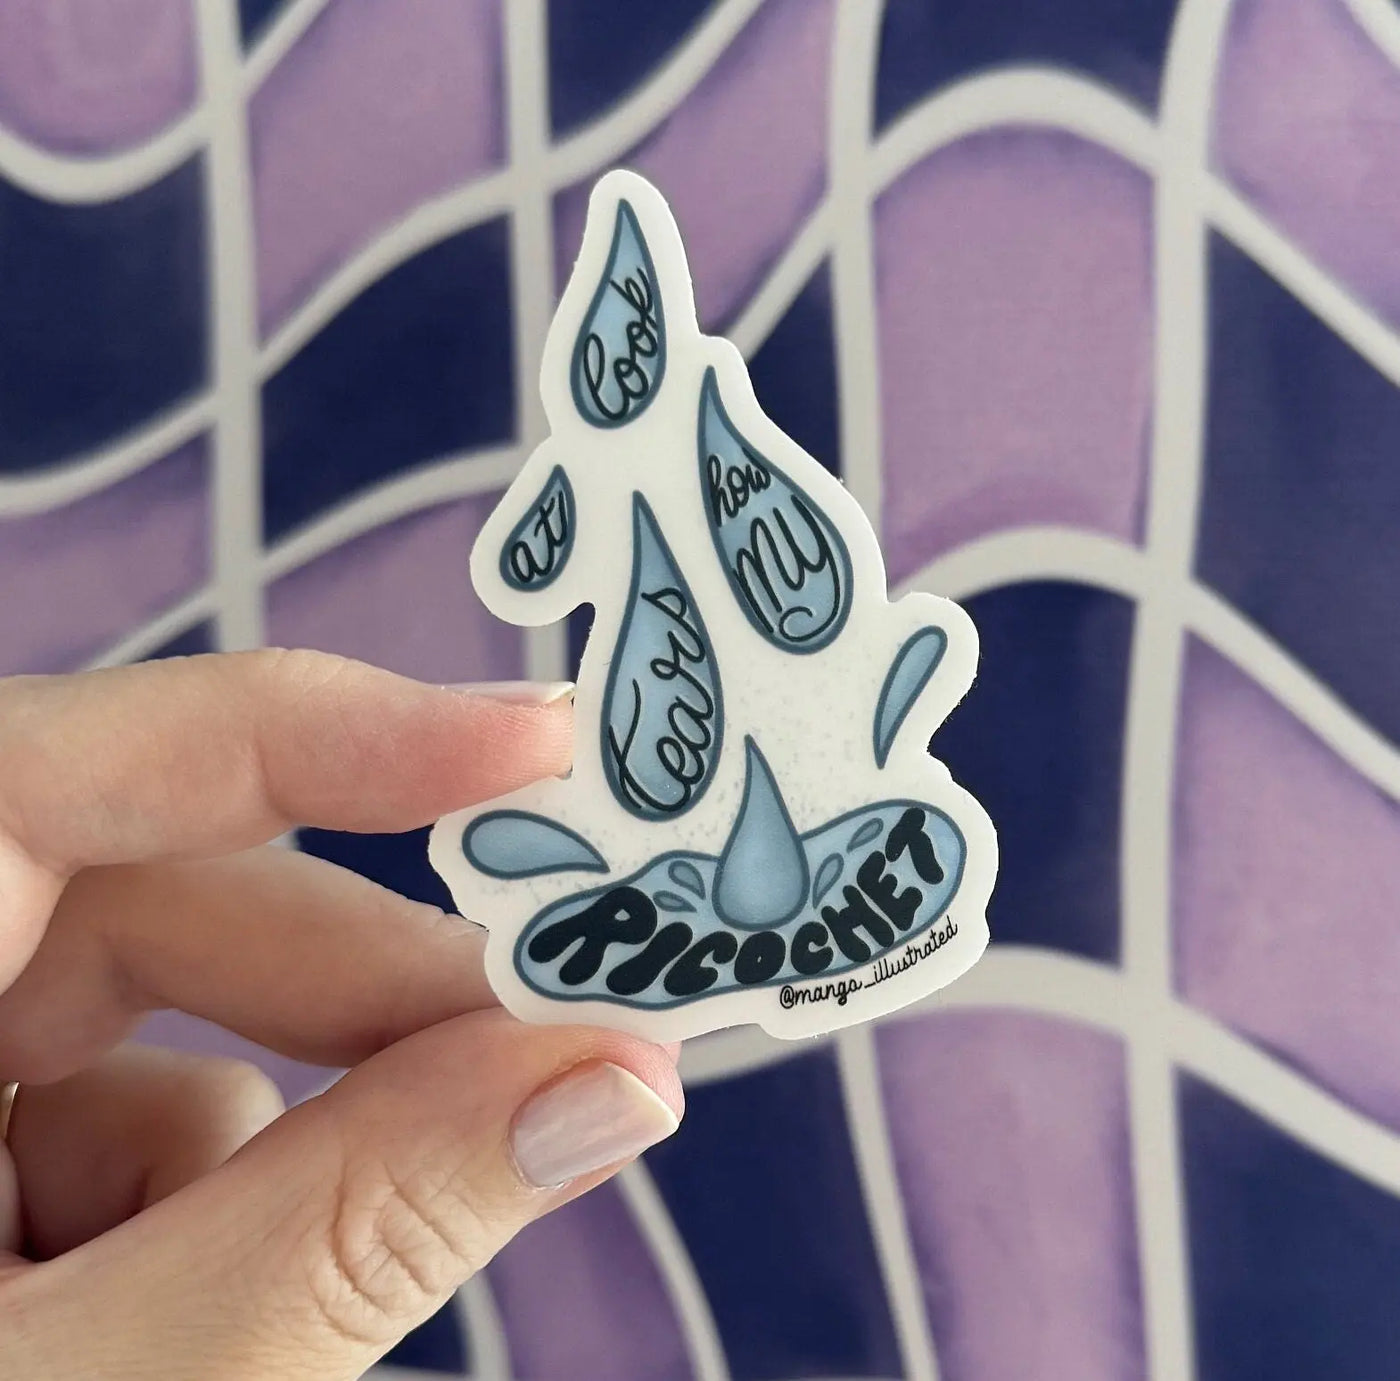 CLEAR Look At How My Tears Ricochet sticker MangoIllustrated